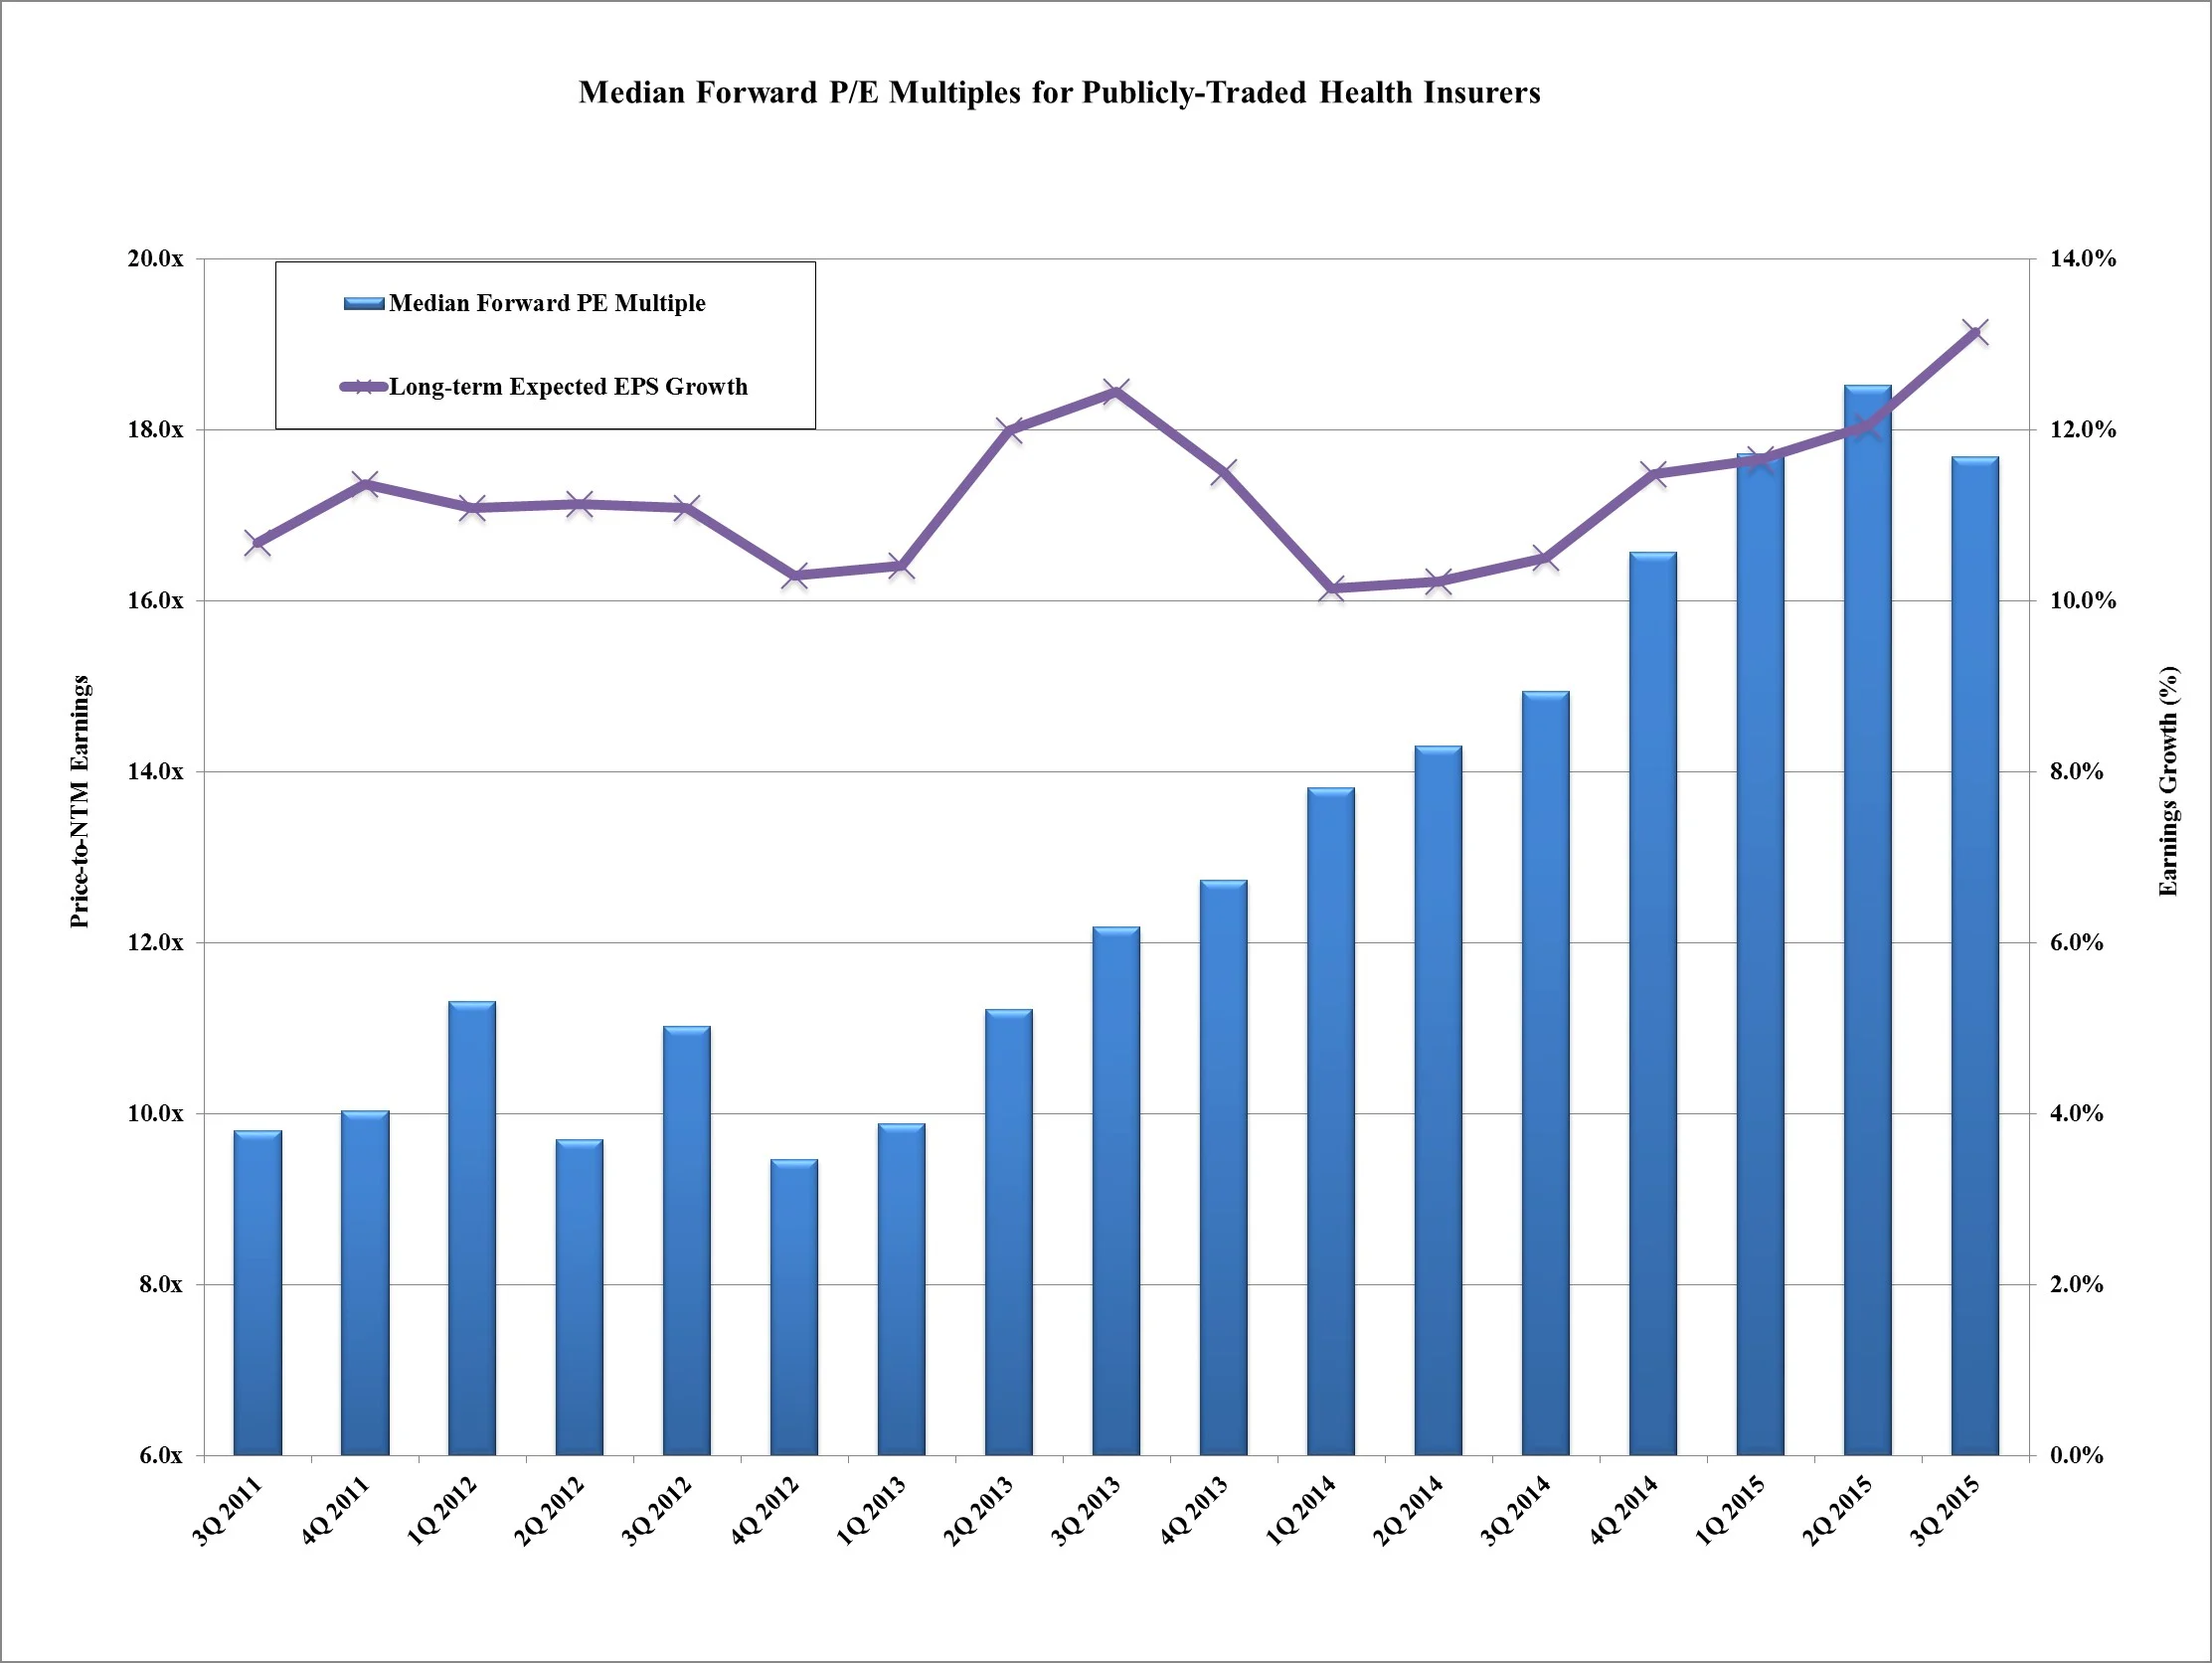 Median Forward P-E Multiples for Publicly-Traded Health Insurers 2015